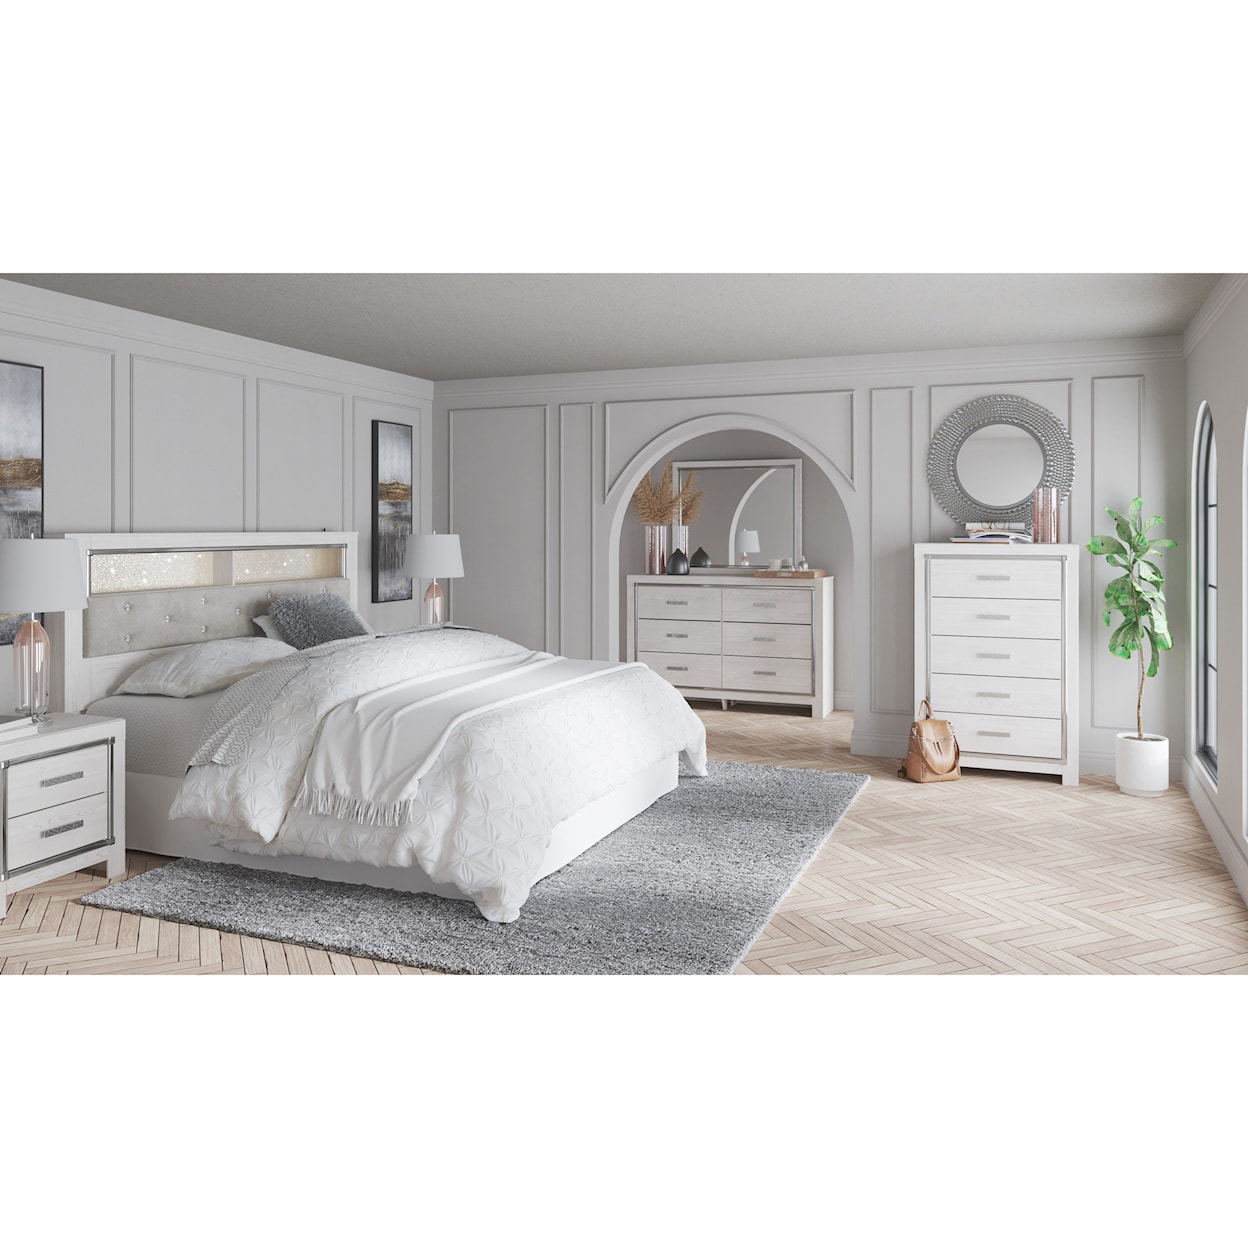 Signature Design Altyra King Bedroom Group